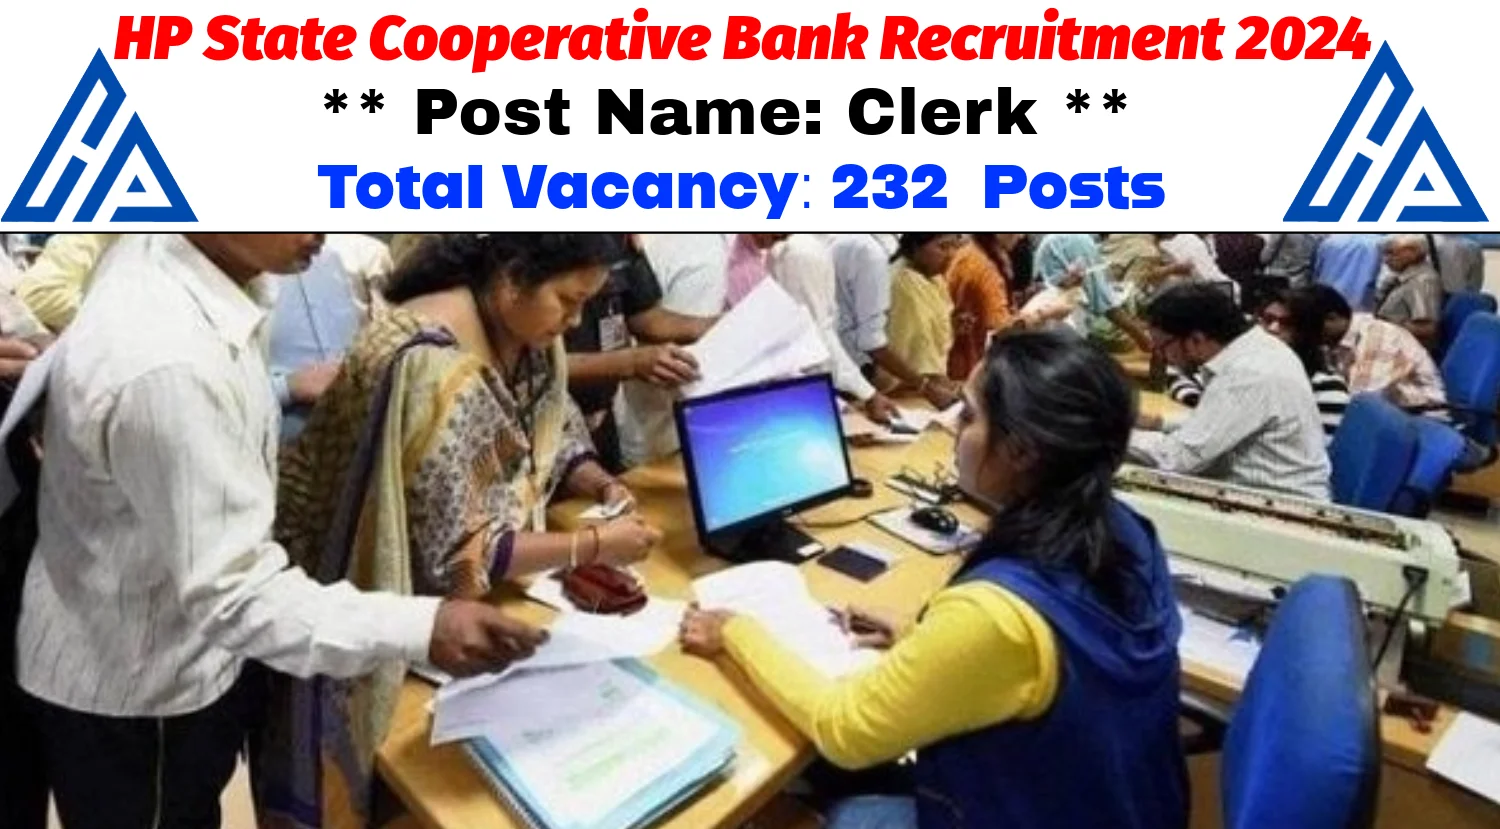 HP State Cooperative Bank Recruitment 2024